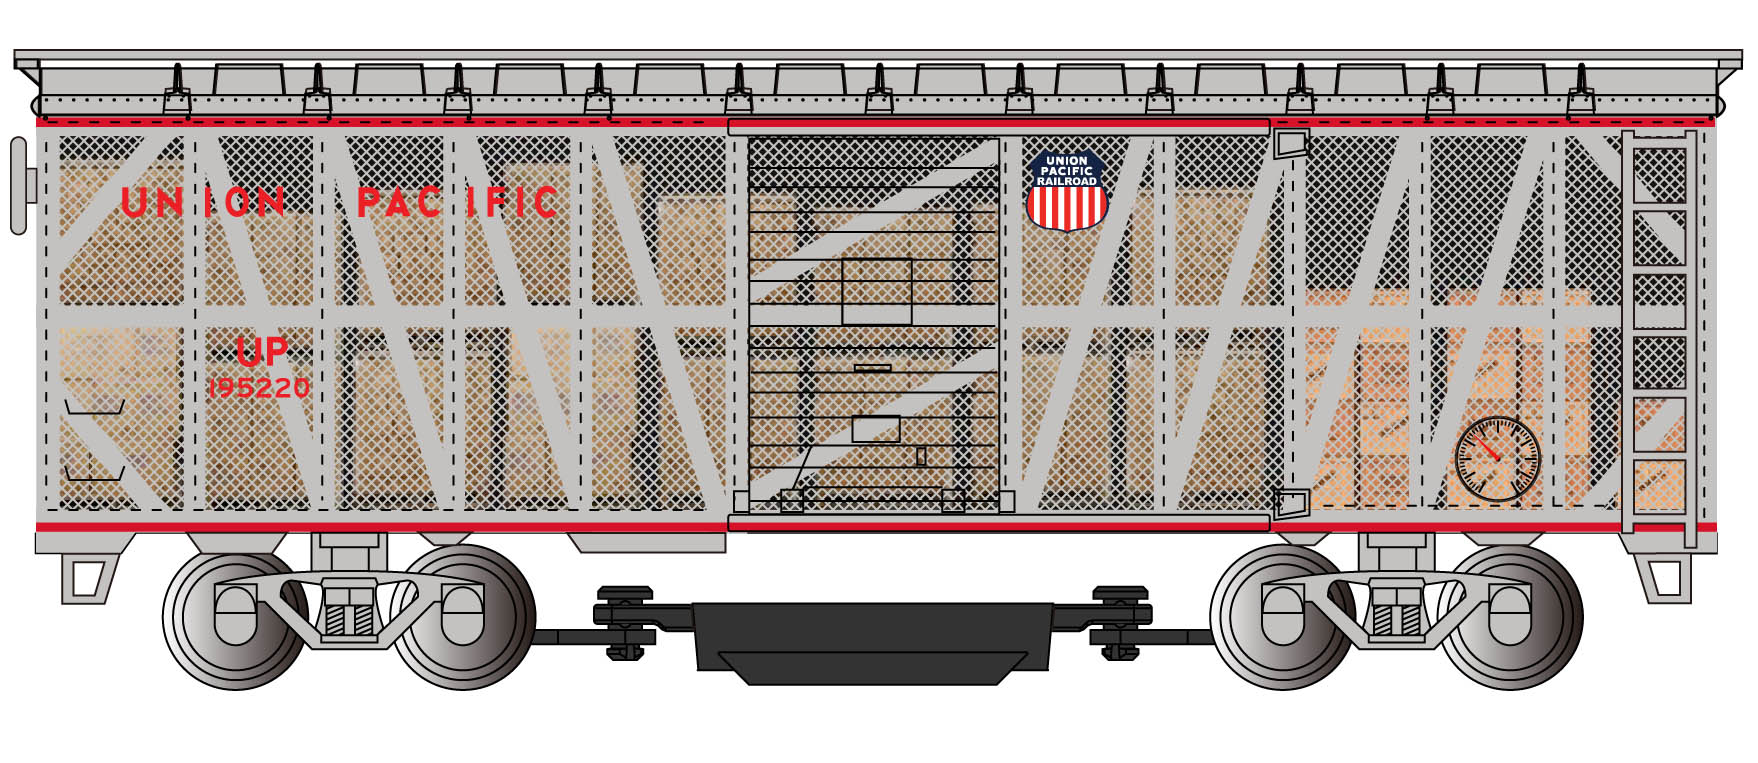 Union Pacific® (Damage Control) - Track Cleaning Car (HO Scale)